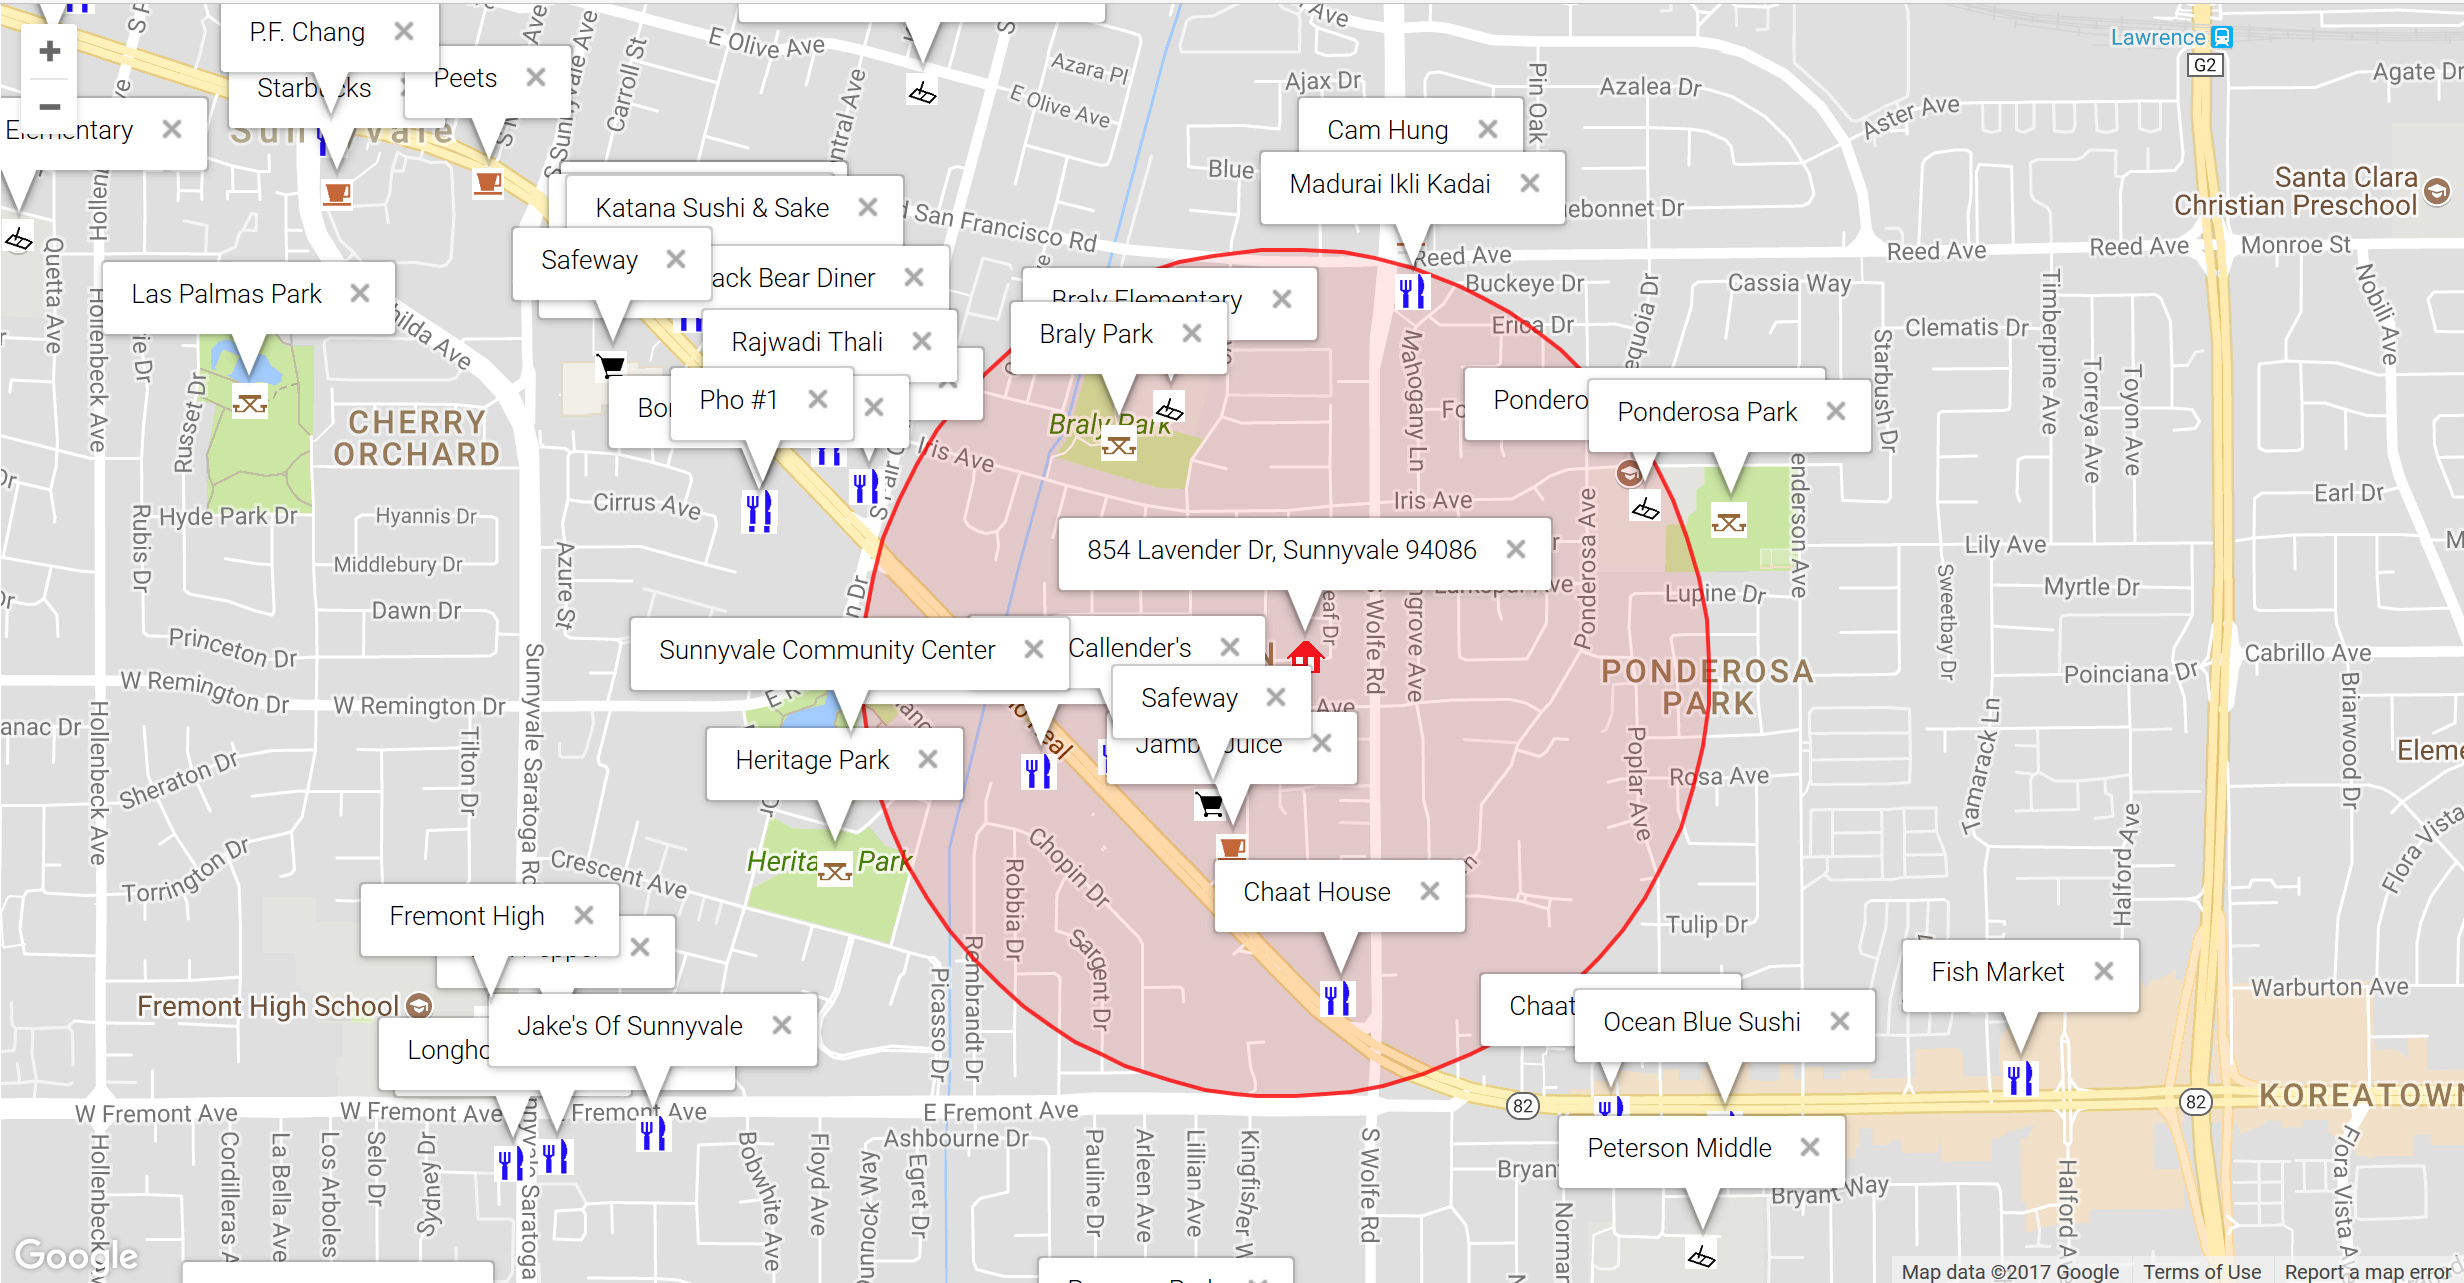 Map of attractions near 854 Lavender Dr, Sunnyvale 94086